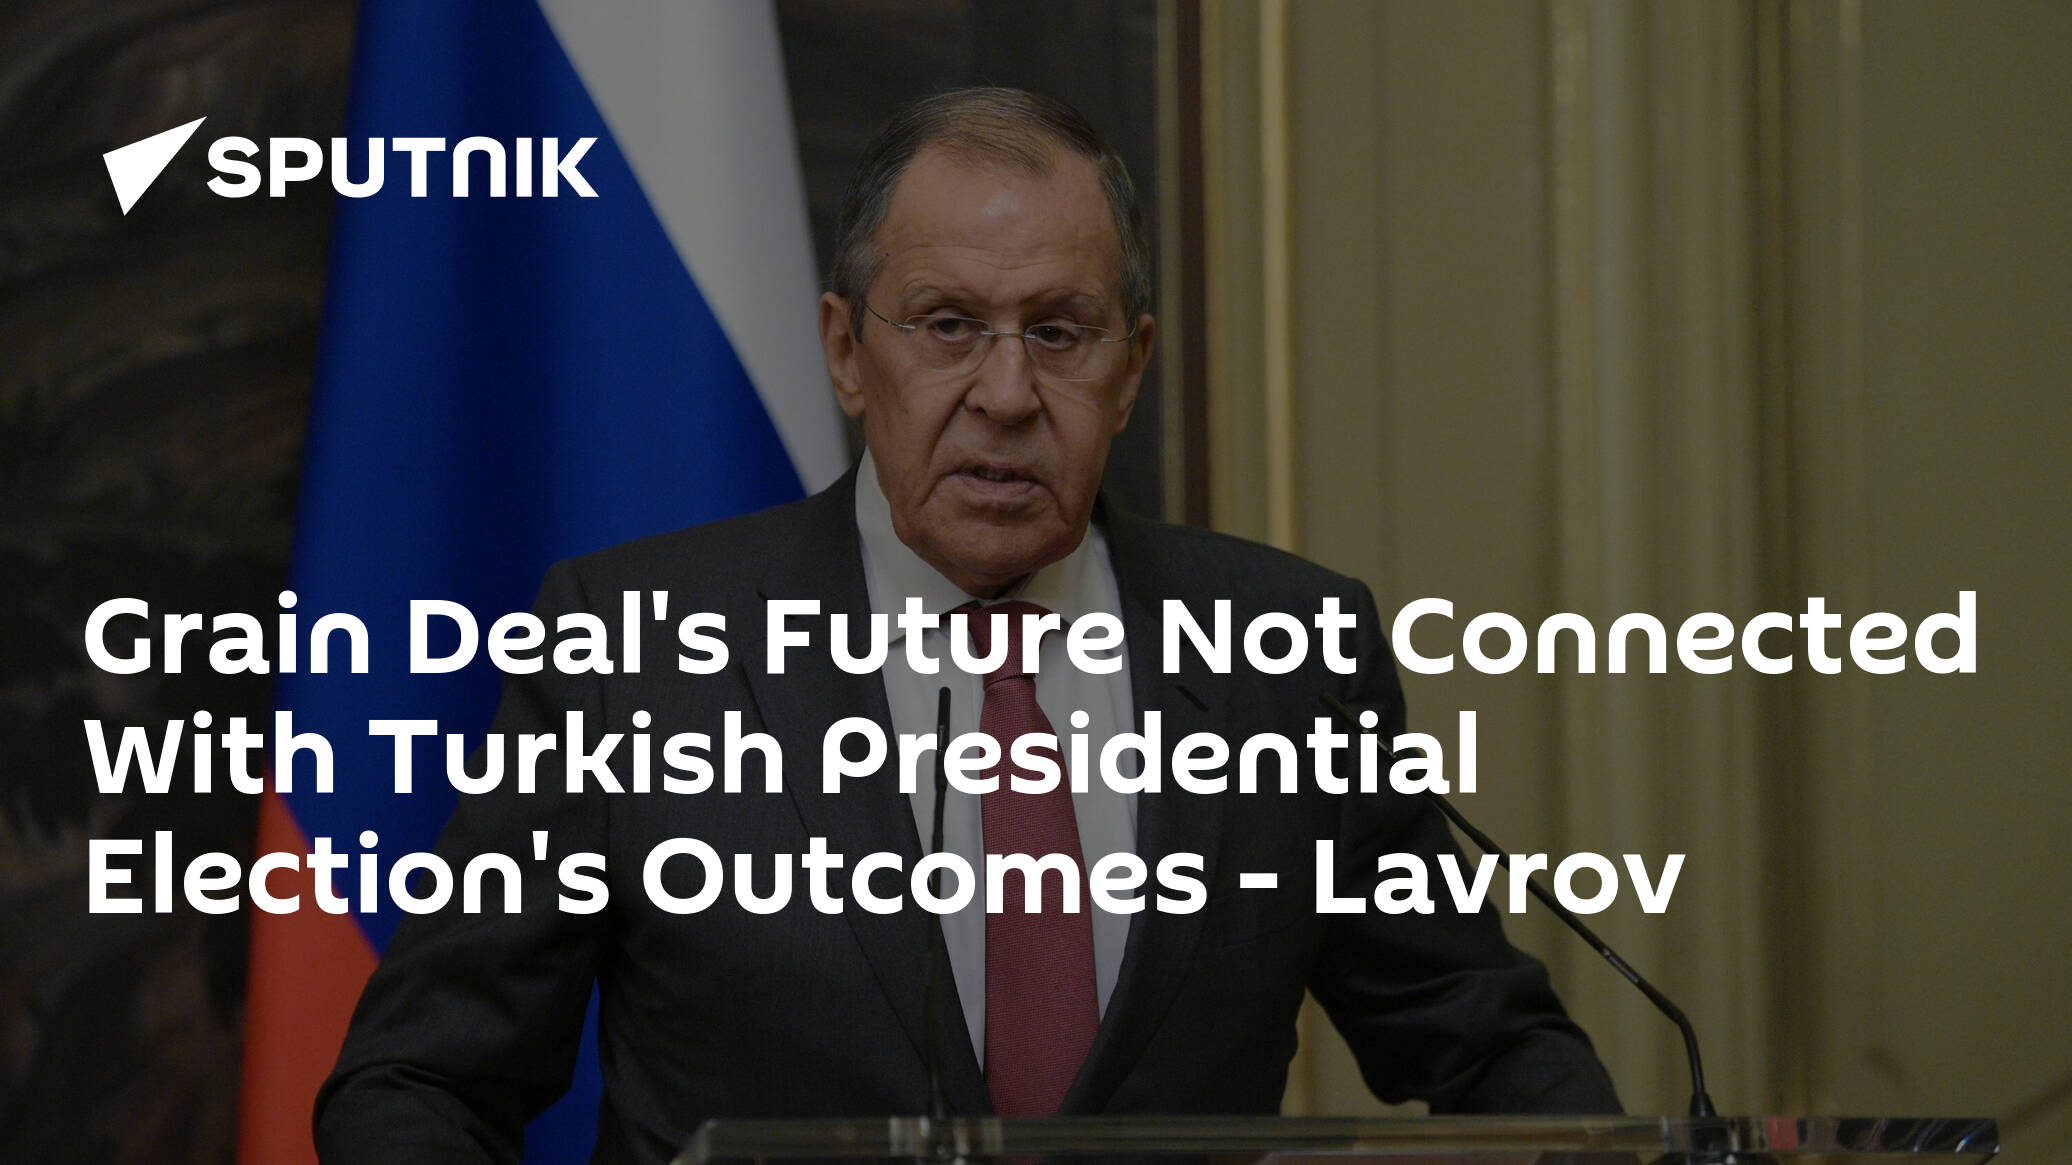 Grain Deal's Future Not Connected With Turkish Presidential Election's Outcomes – Lavrov